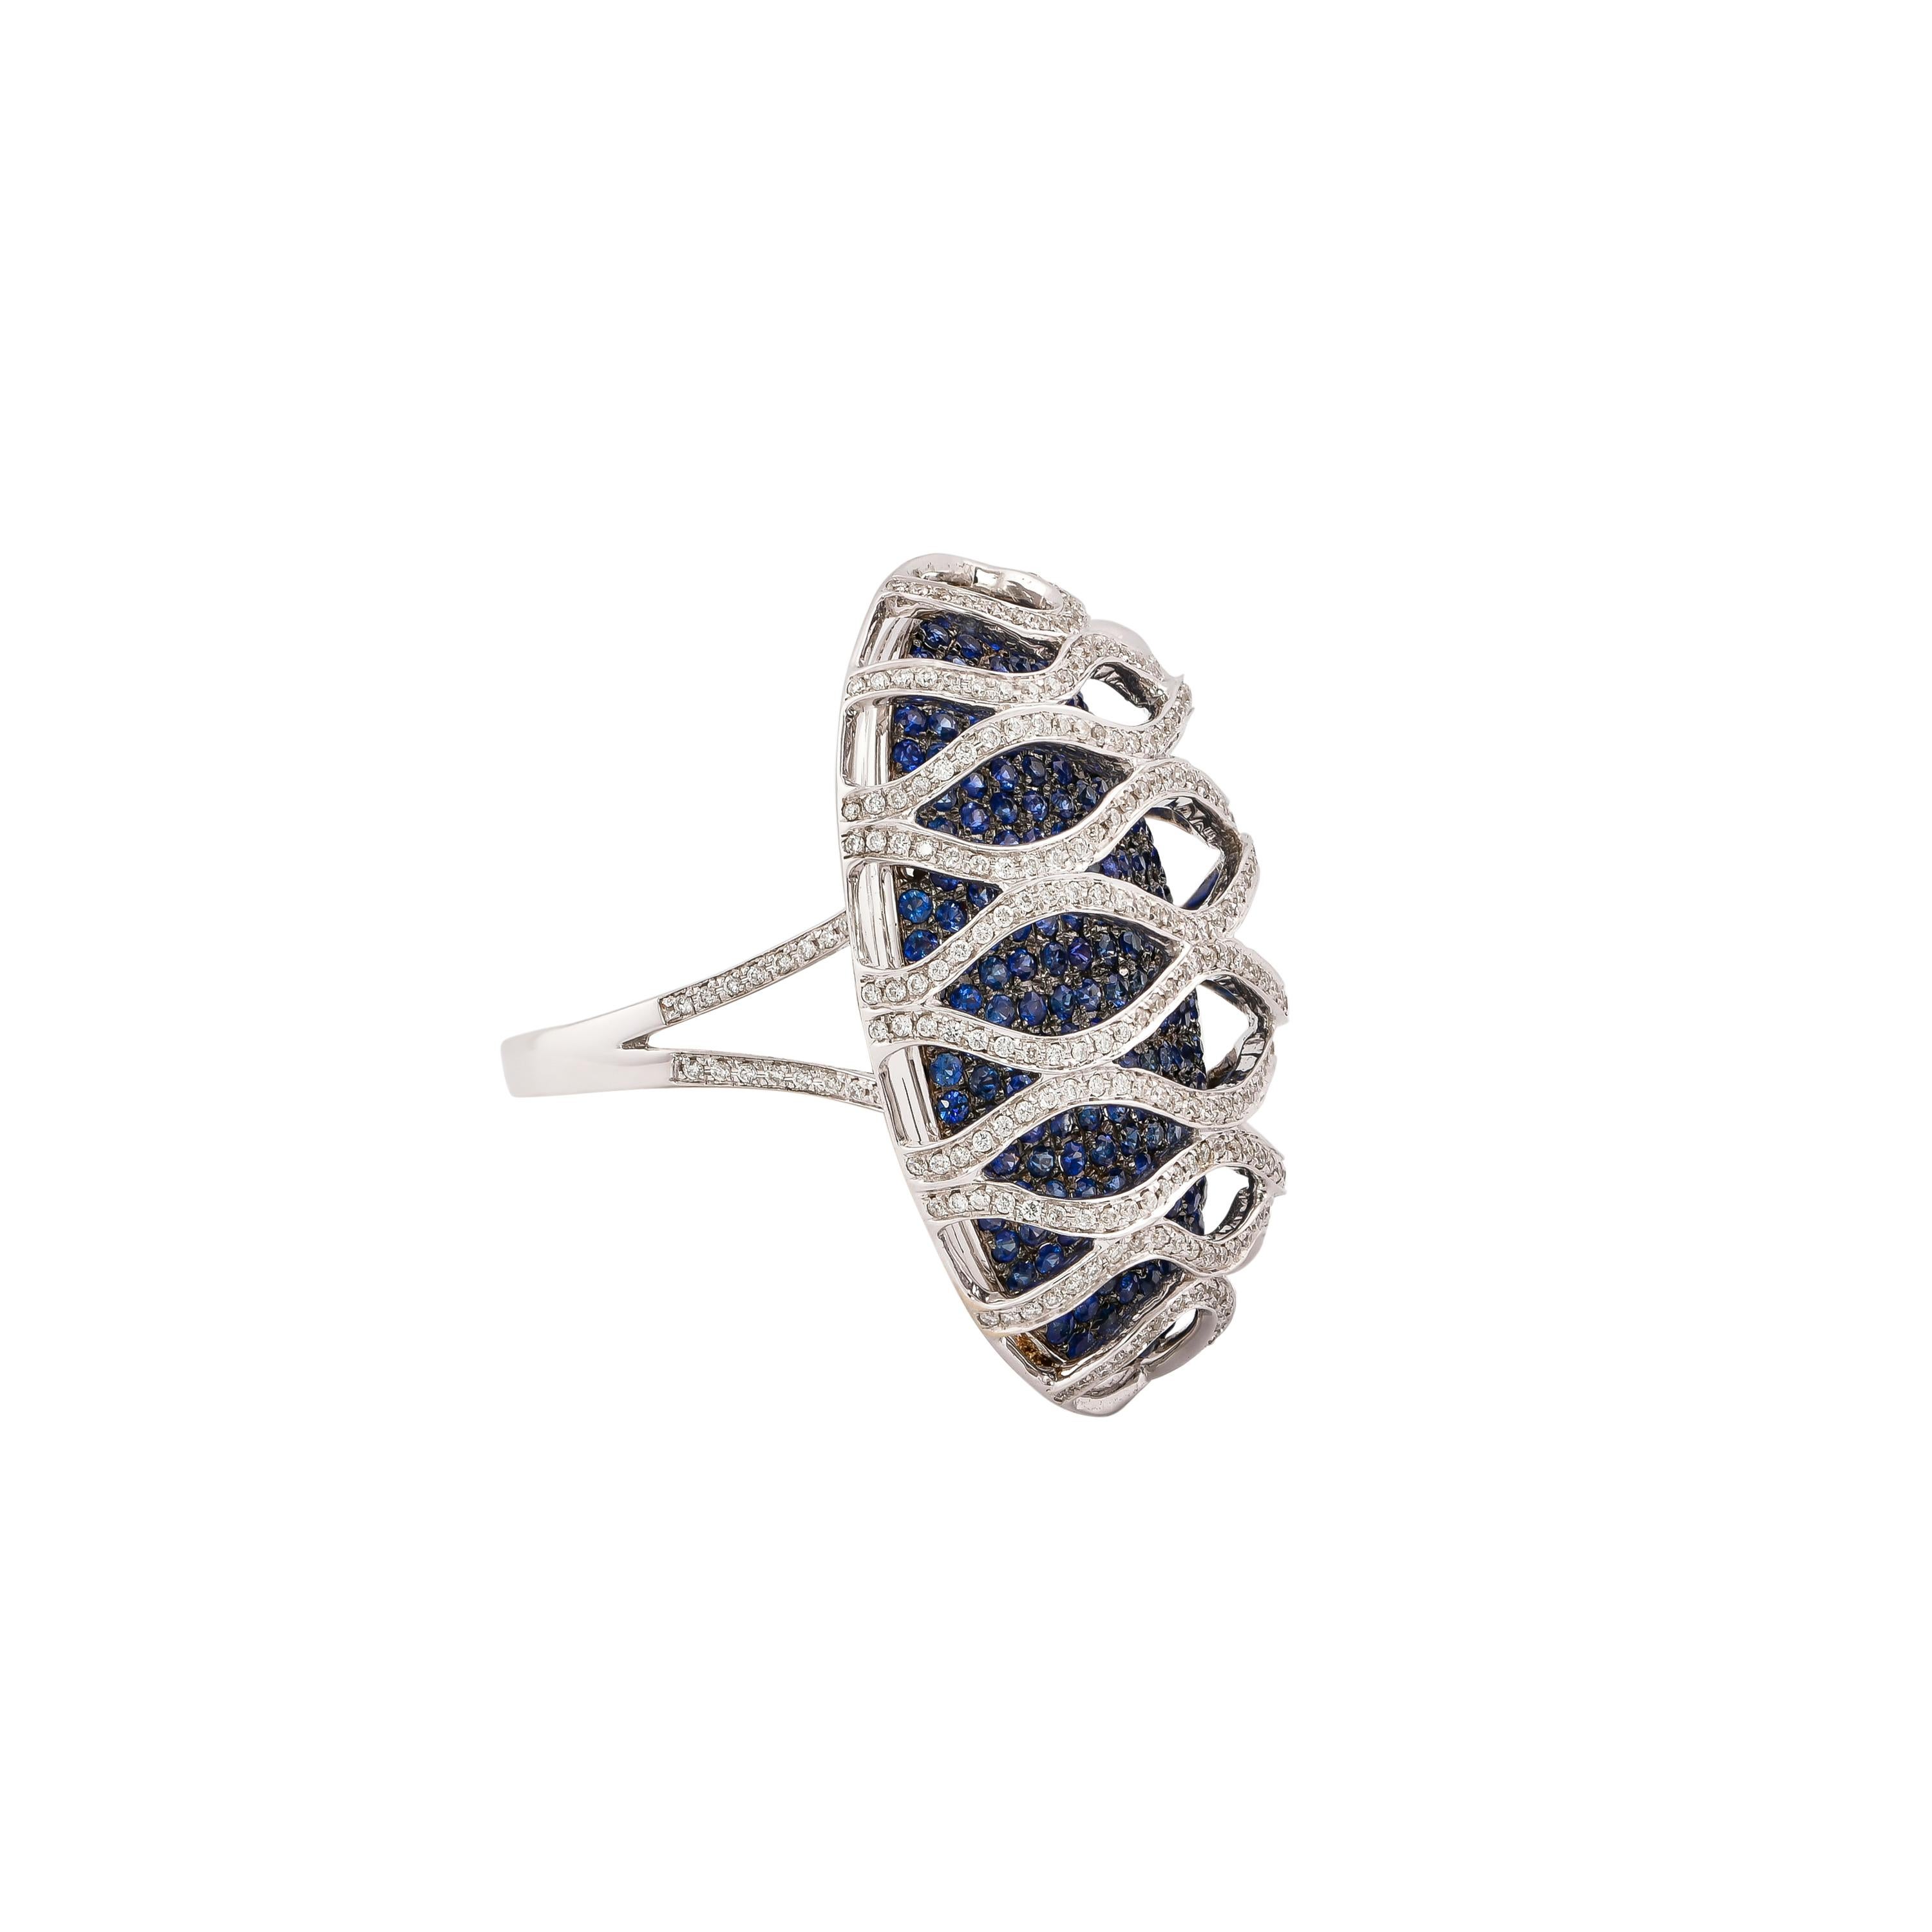 Sunita Nahata presents a collection of fancy cocktail rings with gorgeous gemstones. This ring uses a pave base of blue sapphire with an architecturally constructed diamond cage on top. This unique and contrasting design presents a striking cocktail